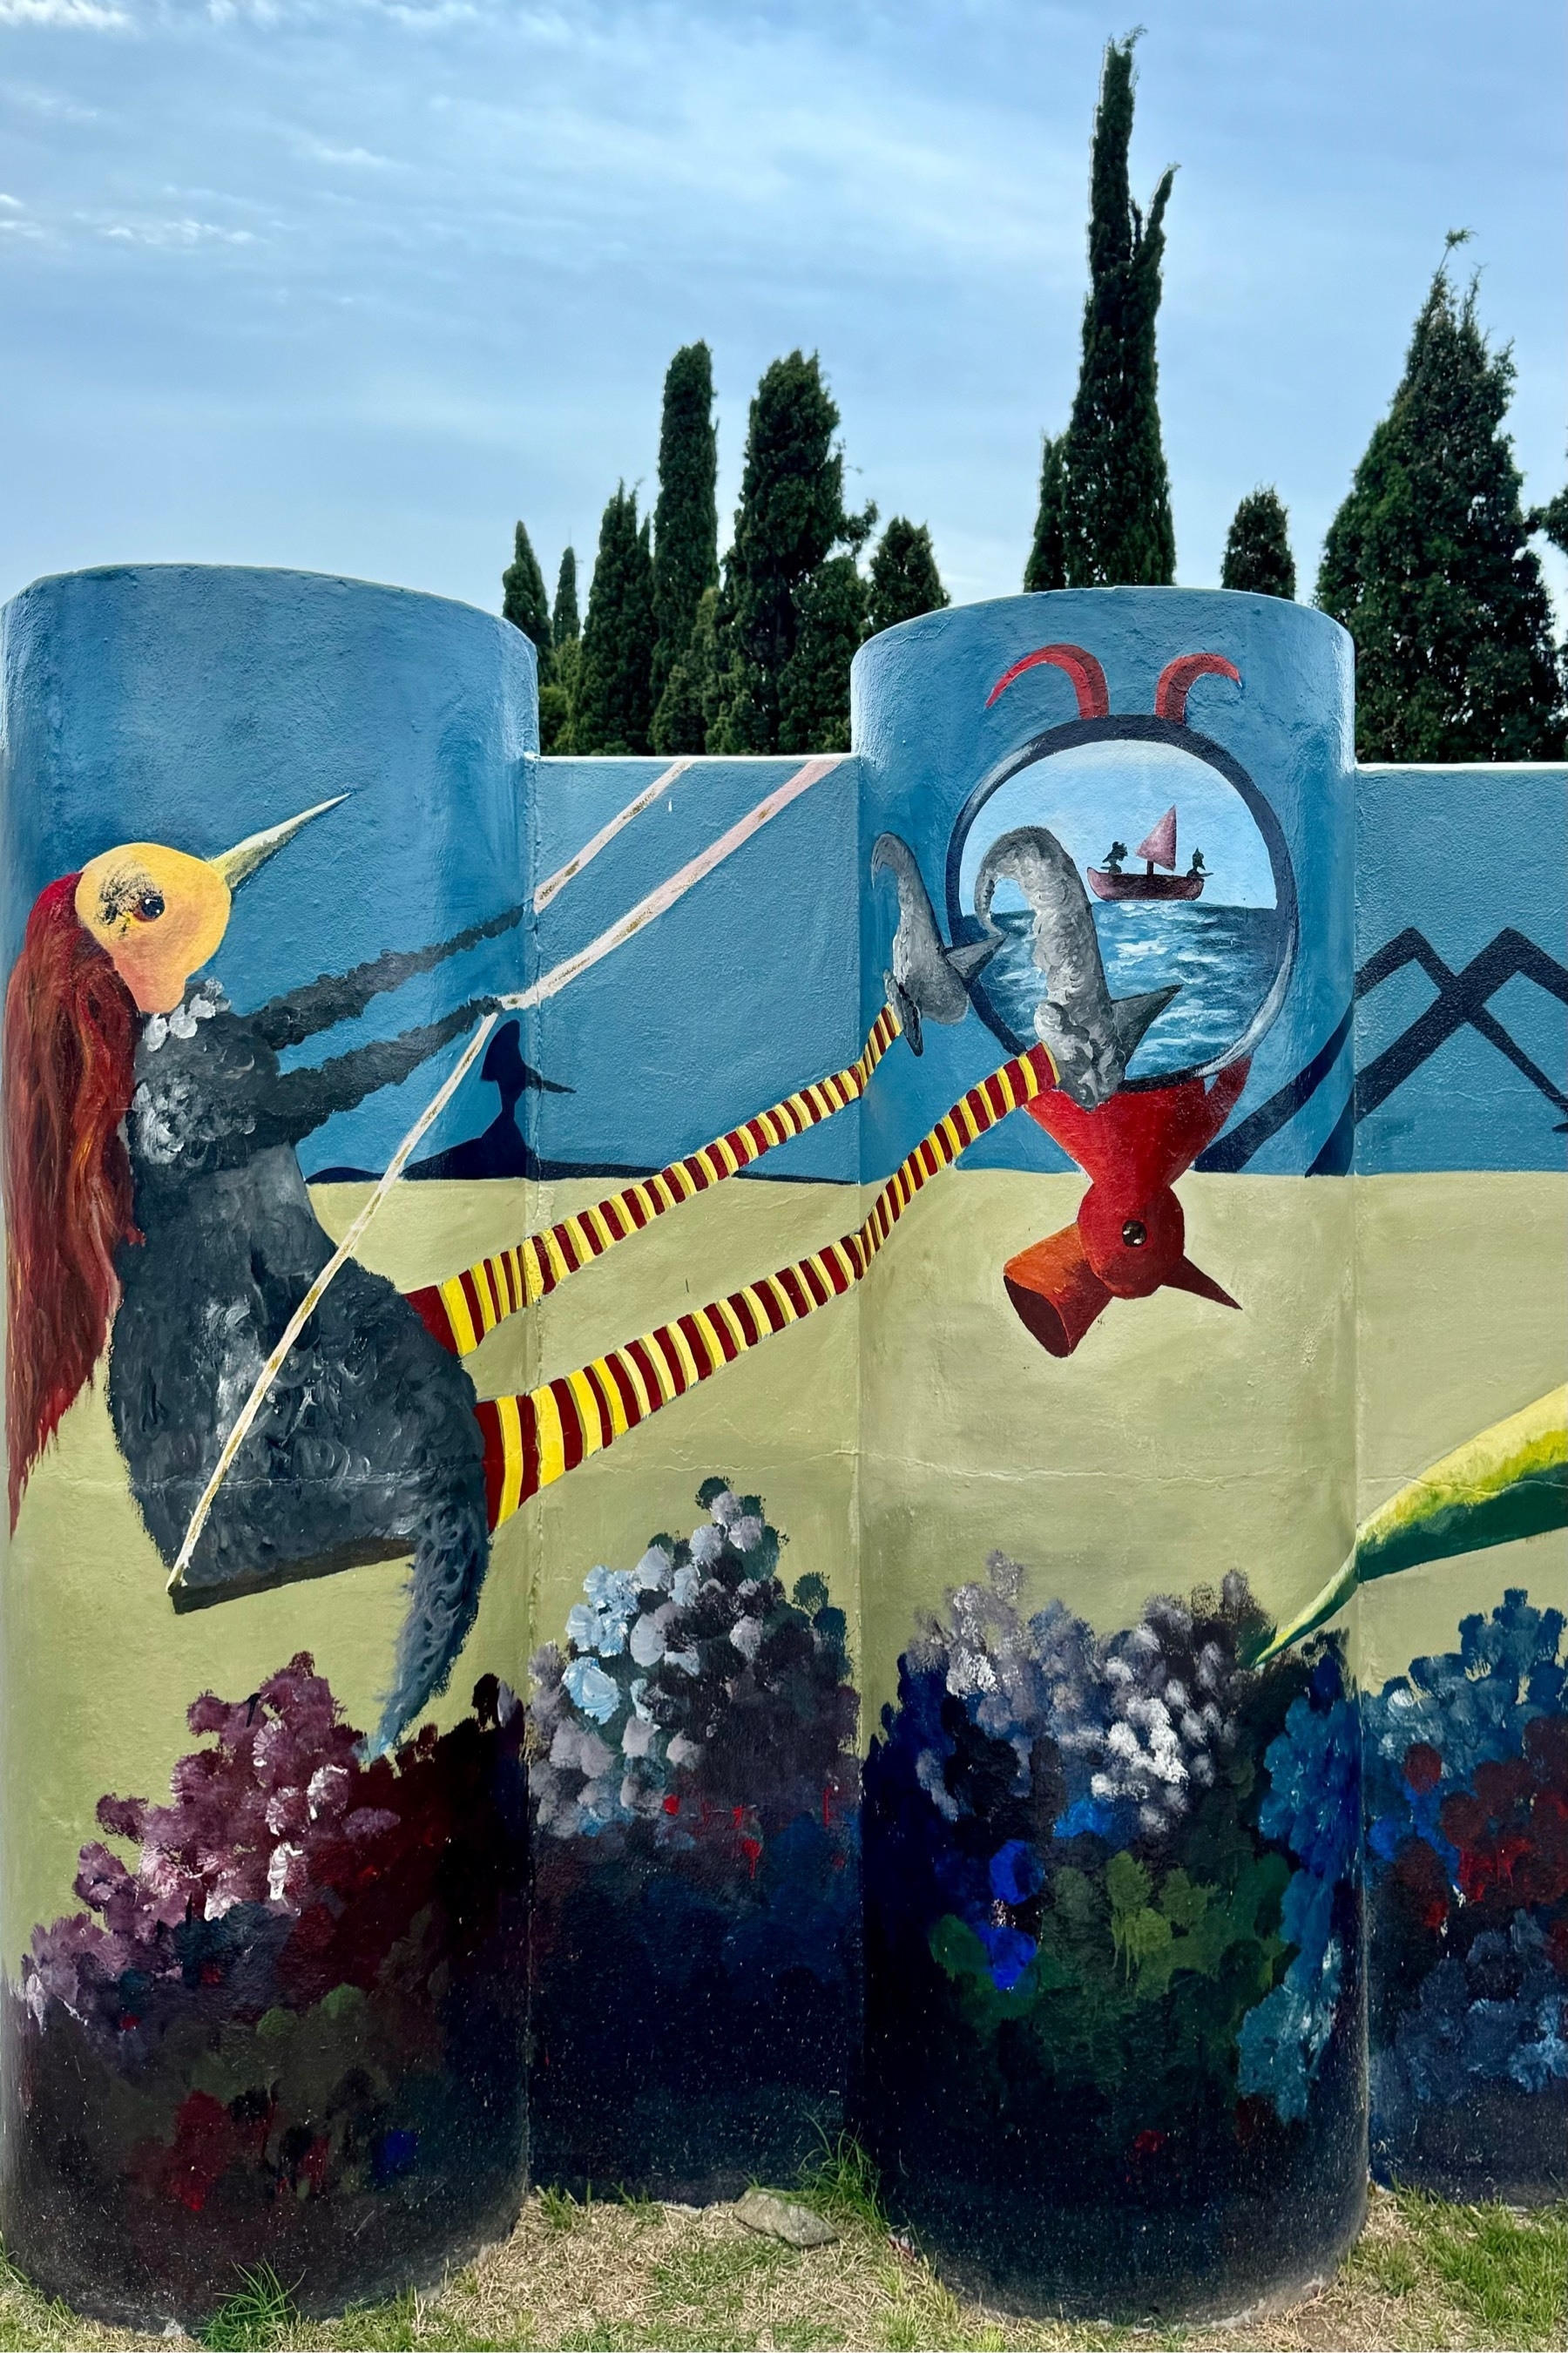 Wall mural of a bird-girl with long red hair, swinging on a swing, with a sailing boat off in the distance